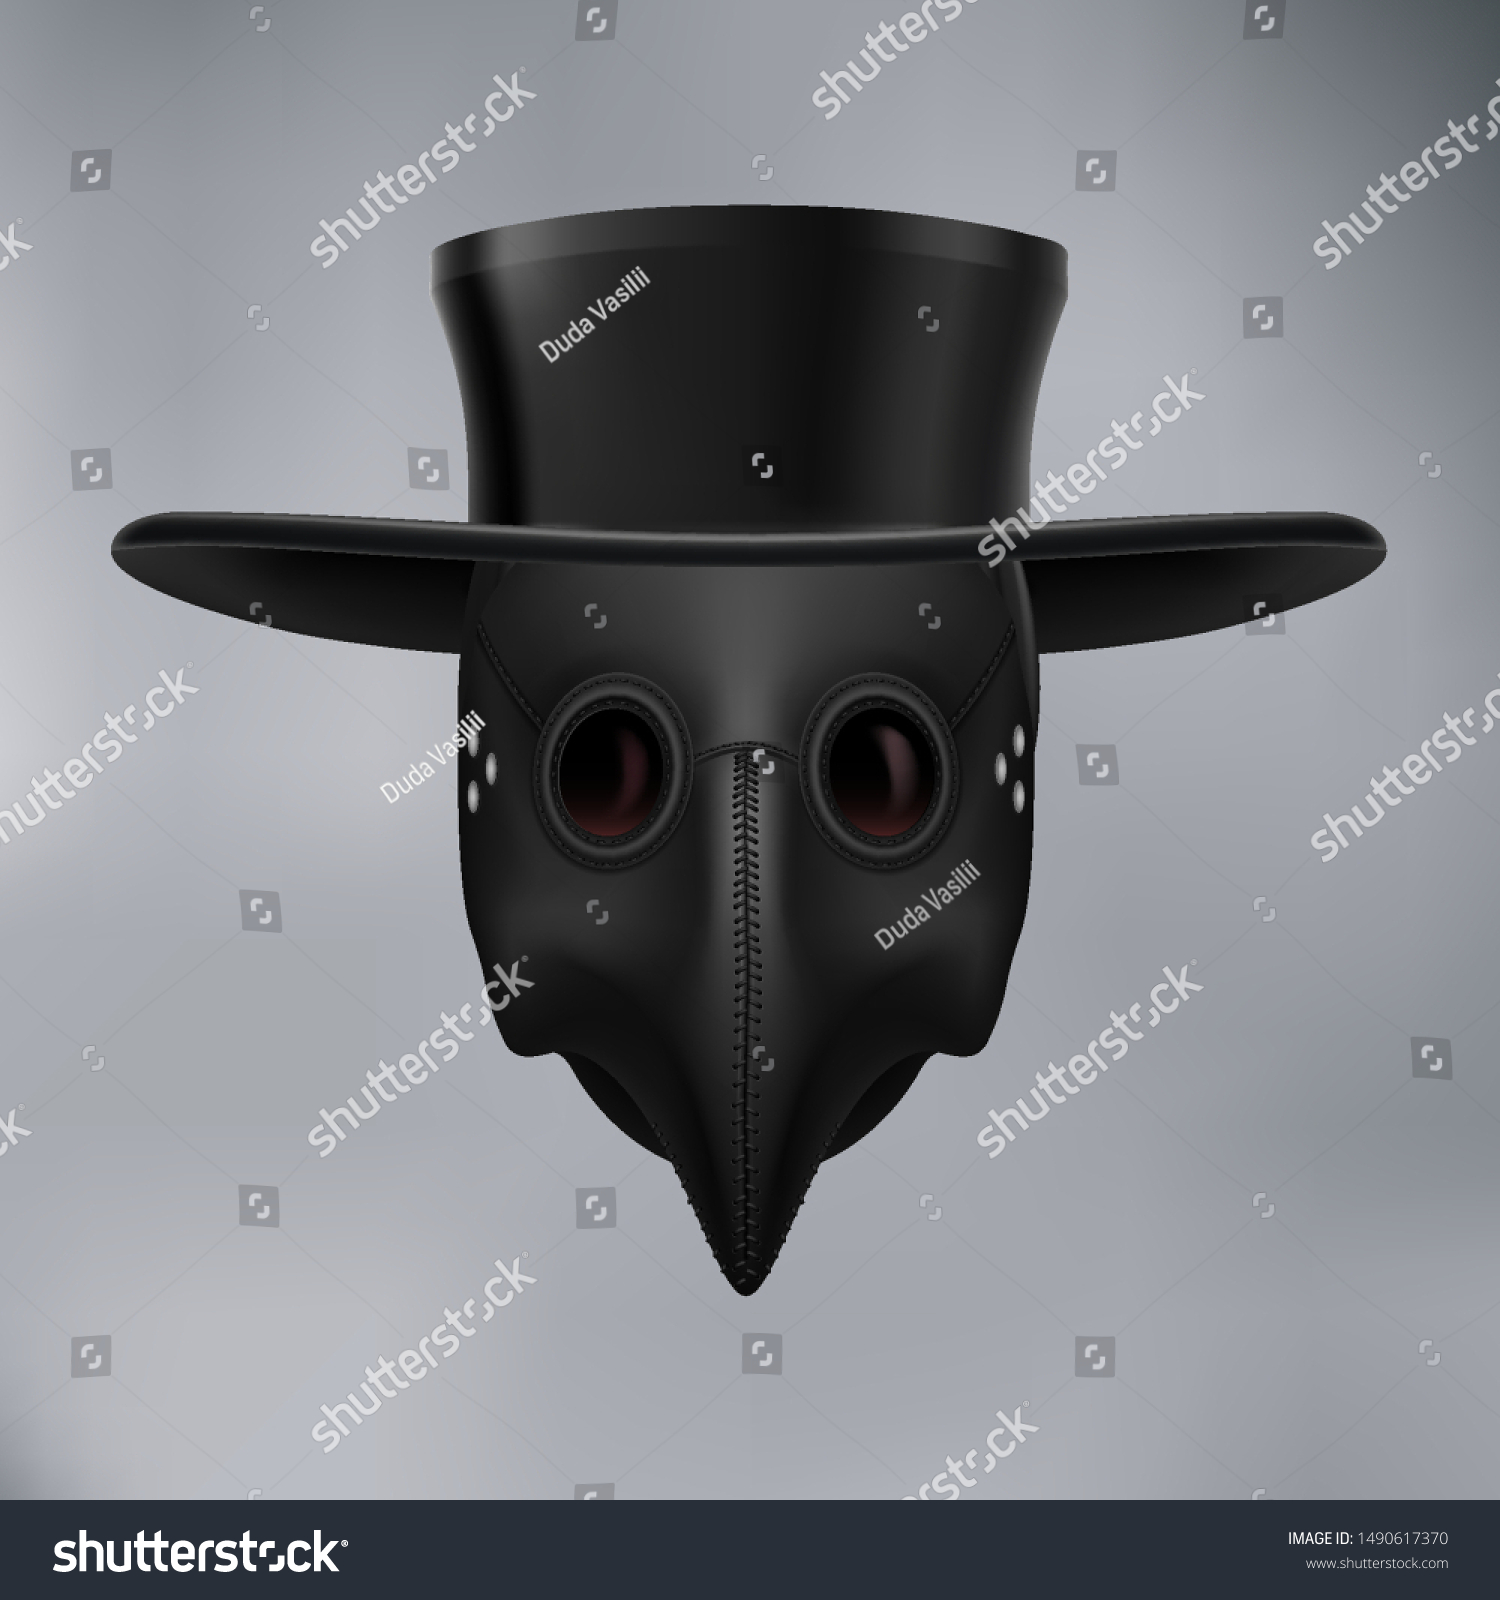 SVG of Plague Doctor Head Profile, with Bird Mask and Hat. Medieval Death Symbol on Gray Background. For Web, Poster, Info Graphic svg